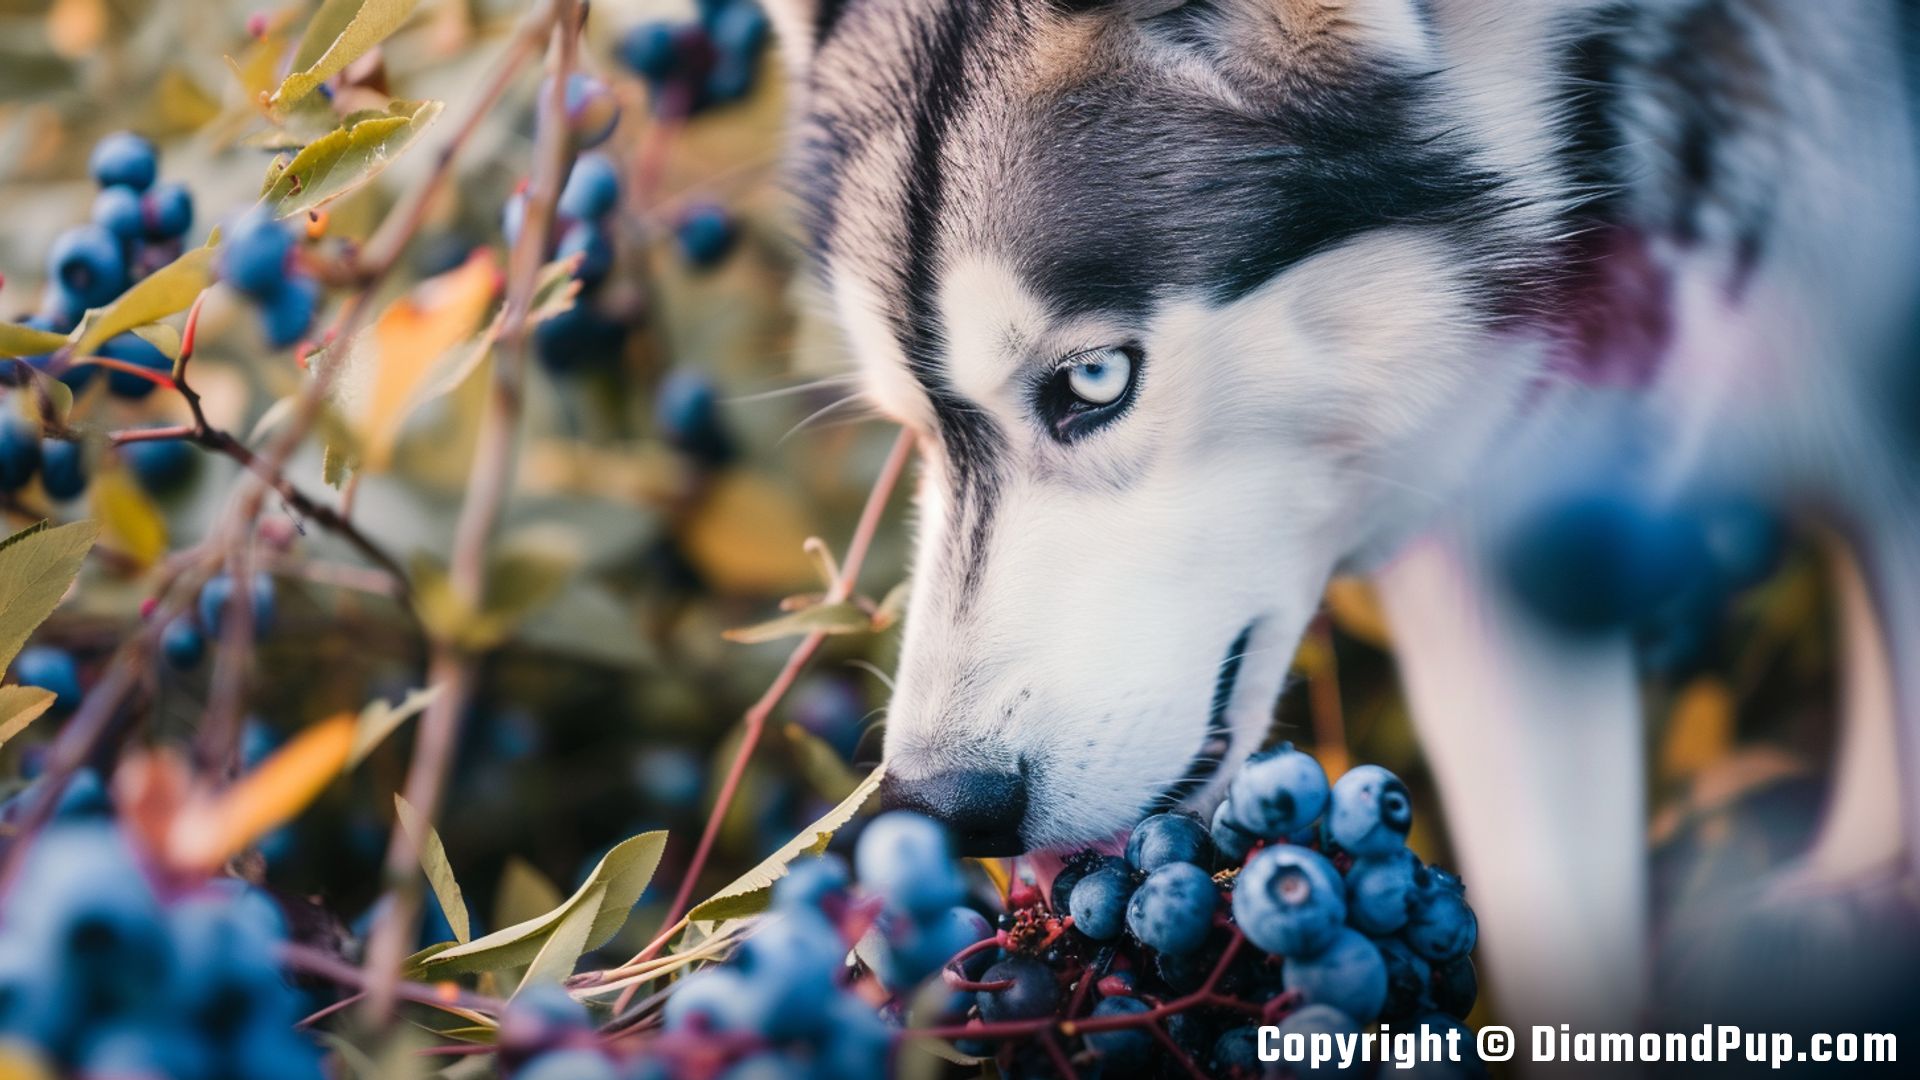 Photo of an Adorable Husky Eating Blueberries